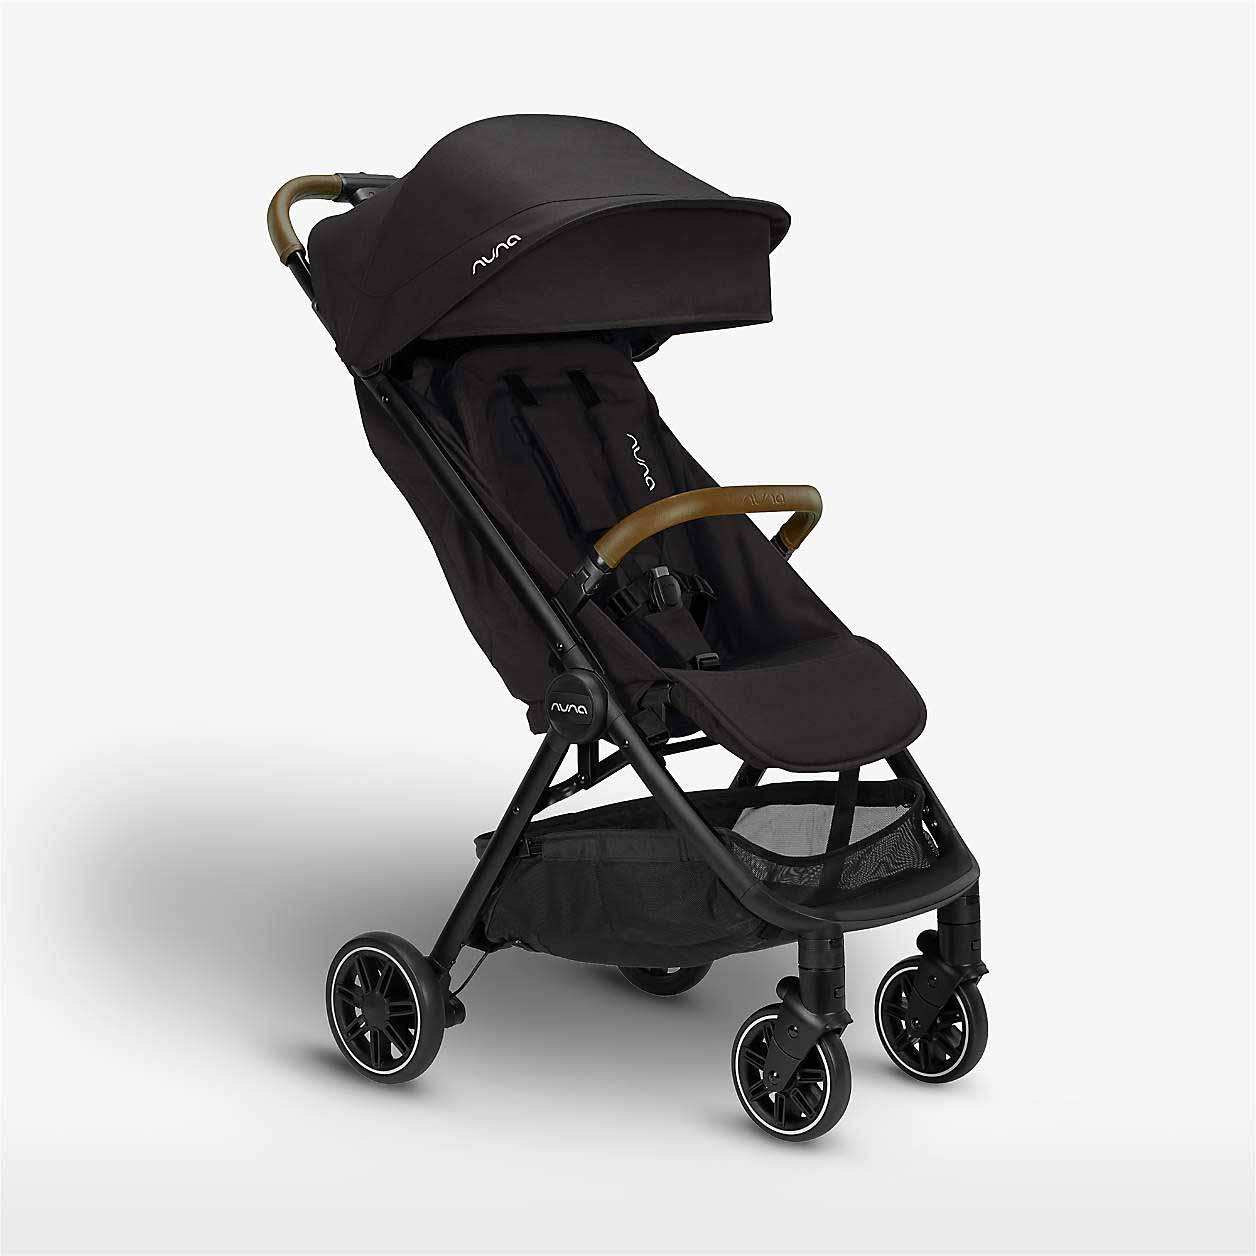 compact baby stroller from Nuna trvl in black 